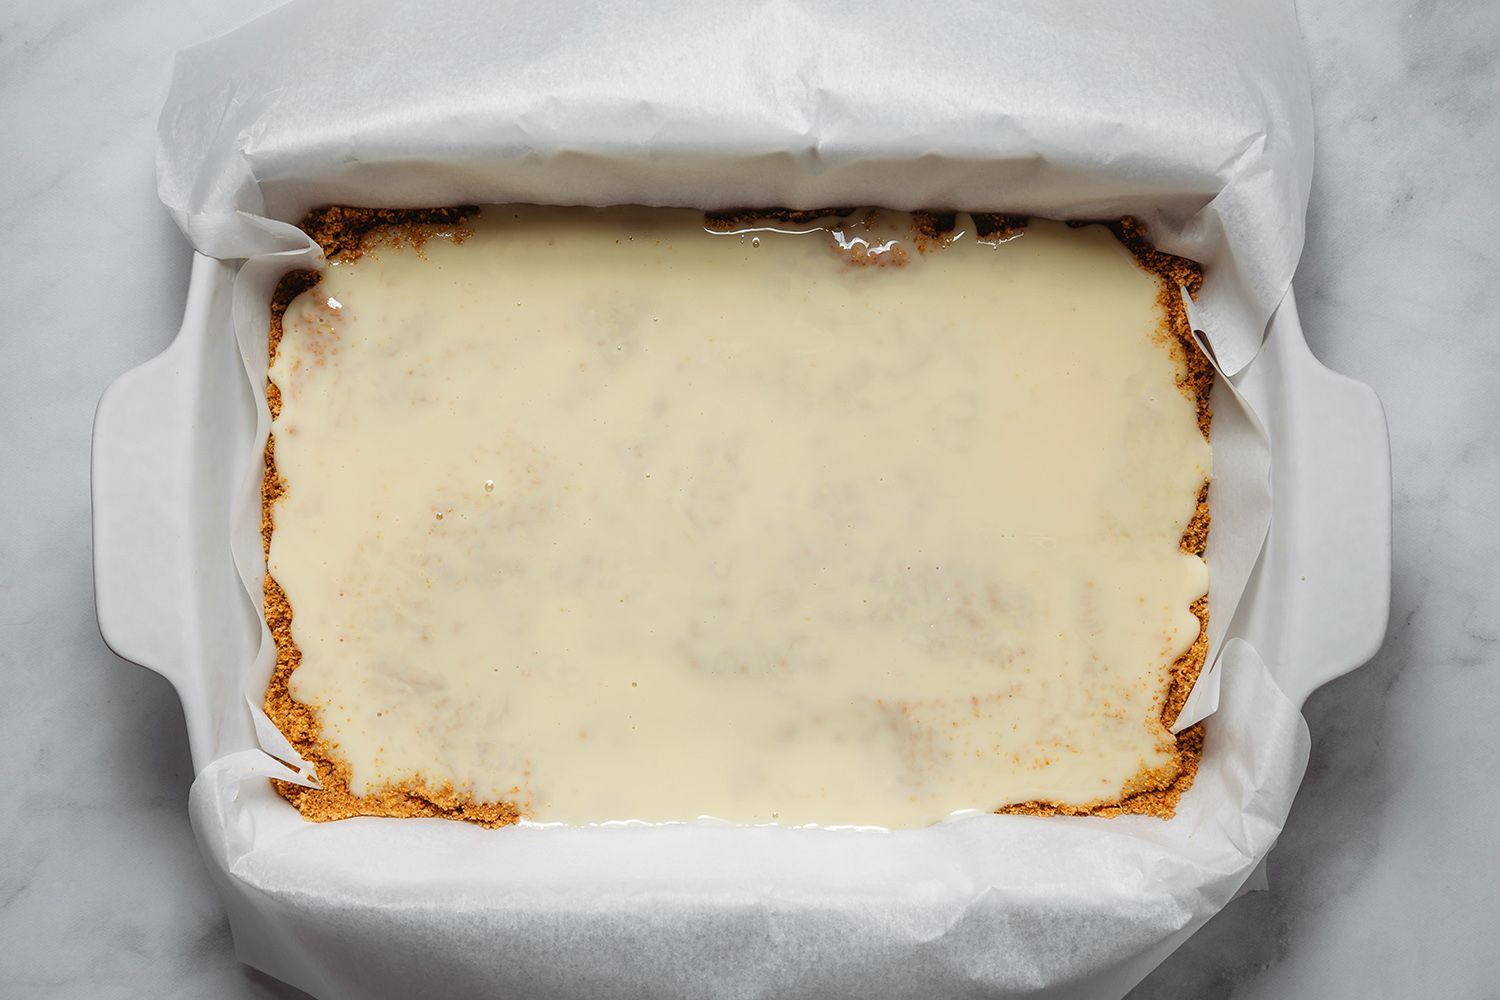 Graham cracker mixture with sweetened condensed milk on top in a prepared baking dish